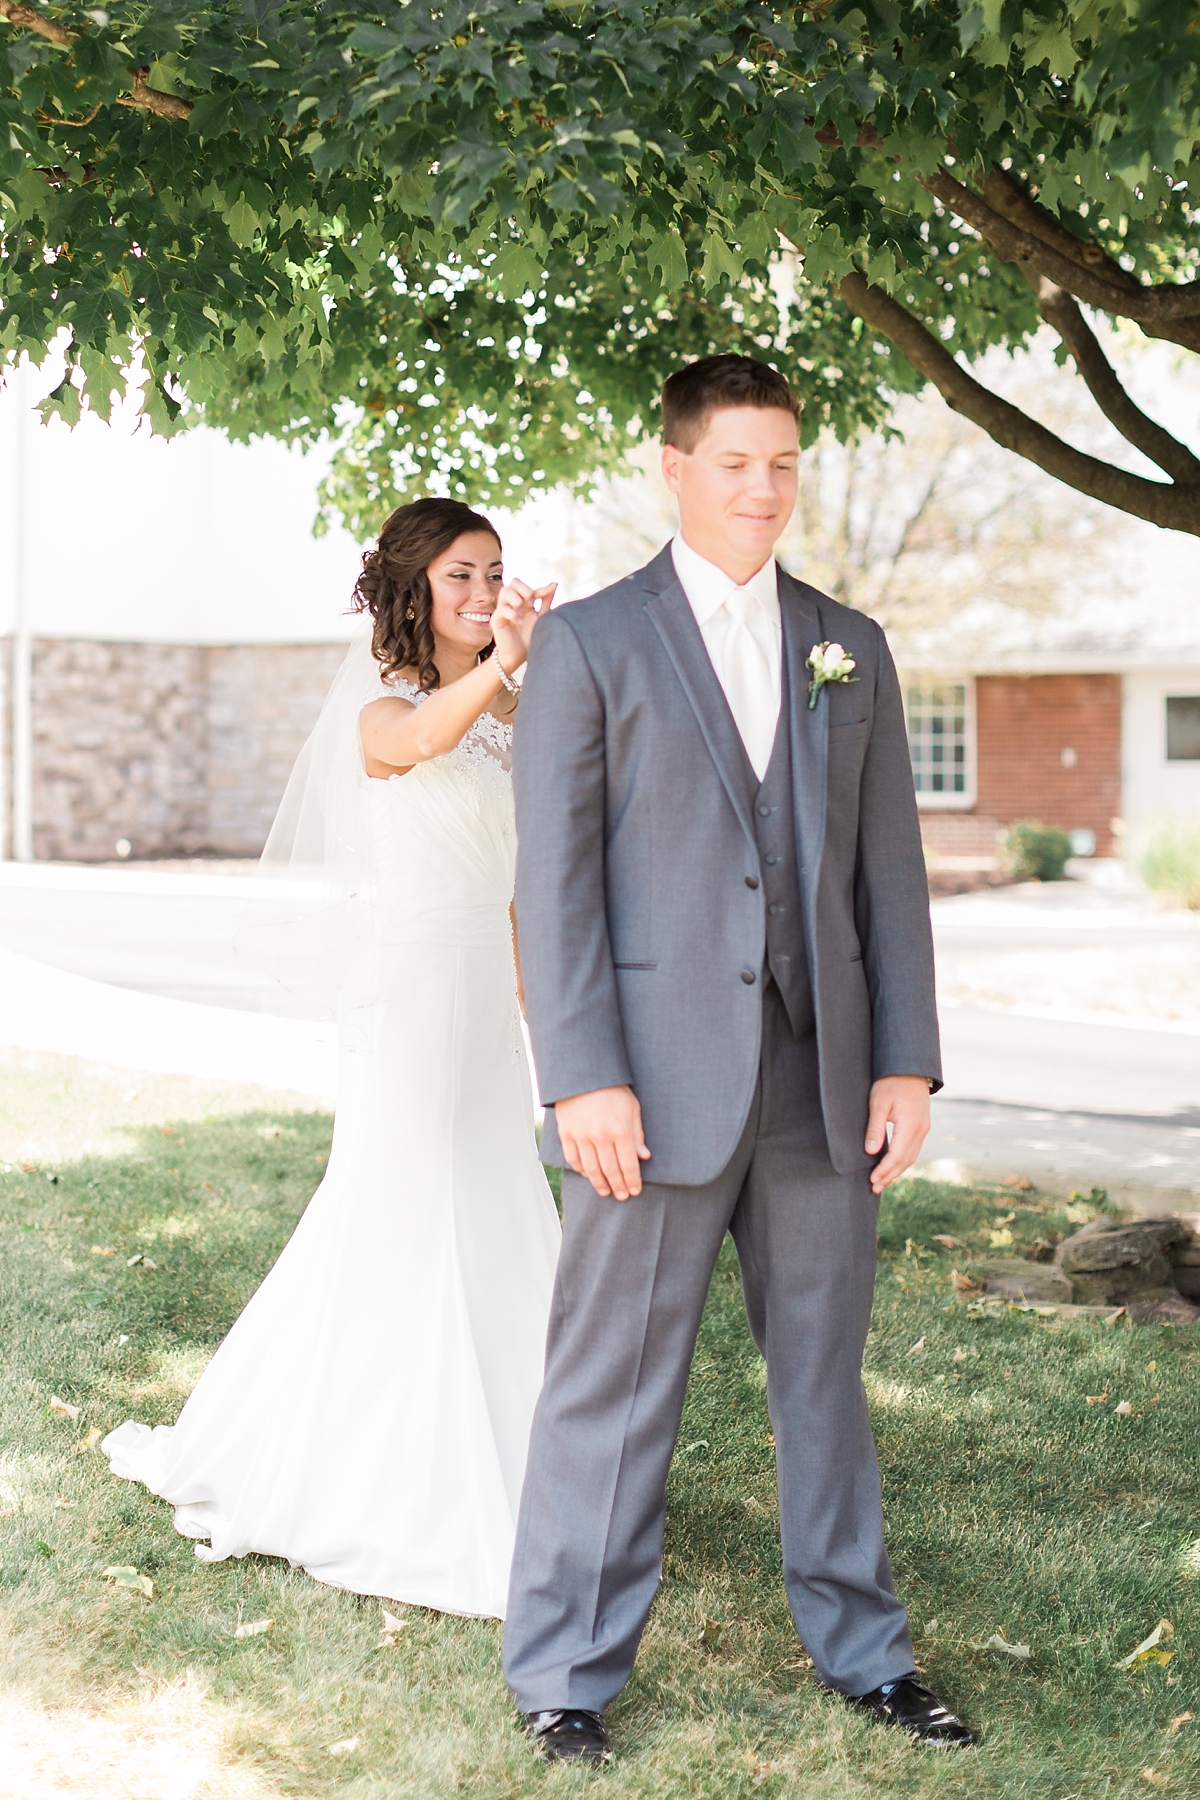 A stunning rustic chic wedding at the Purcell Friendship Hall in Hershey, PA.